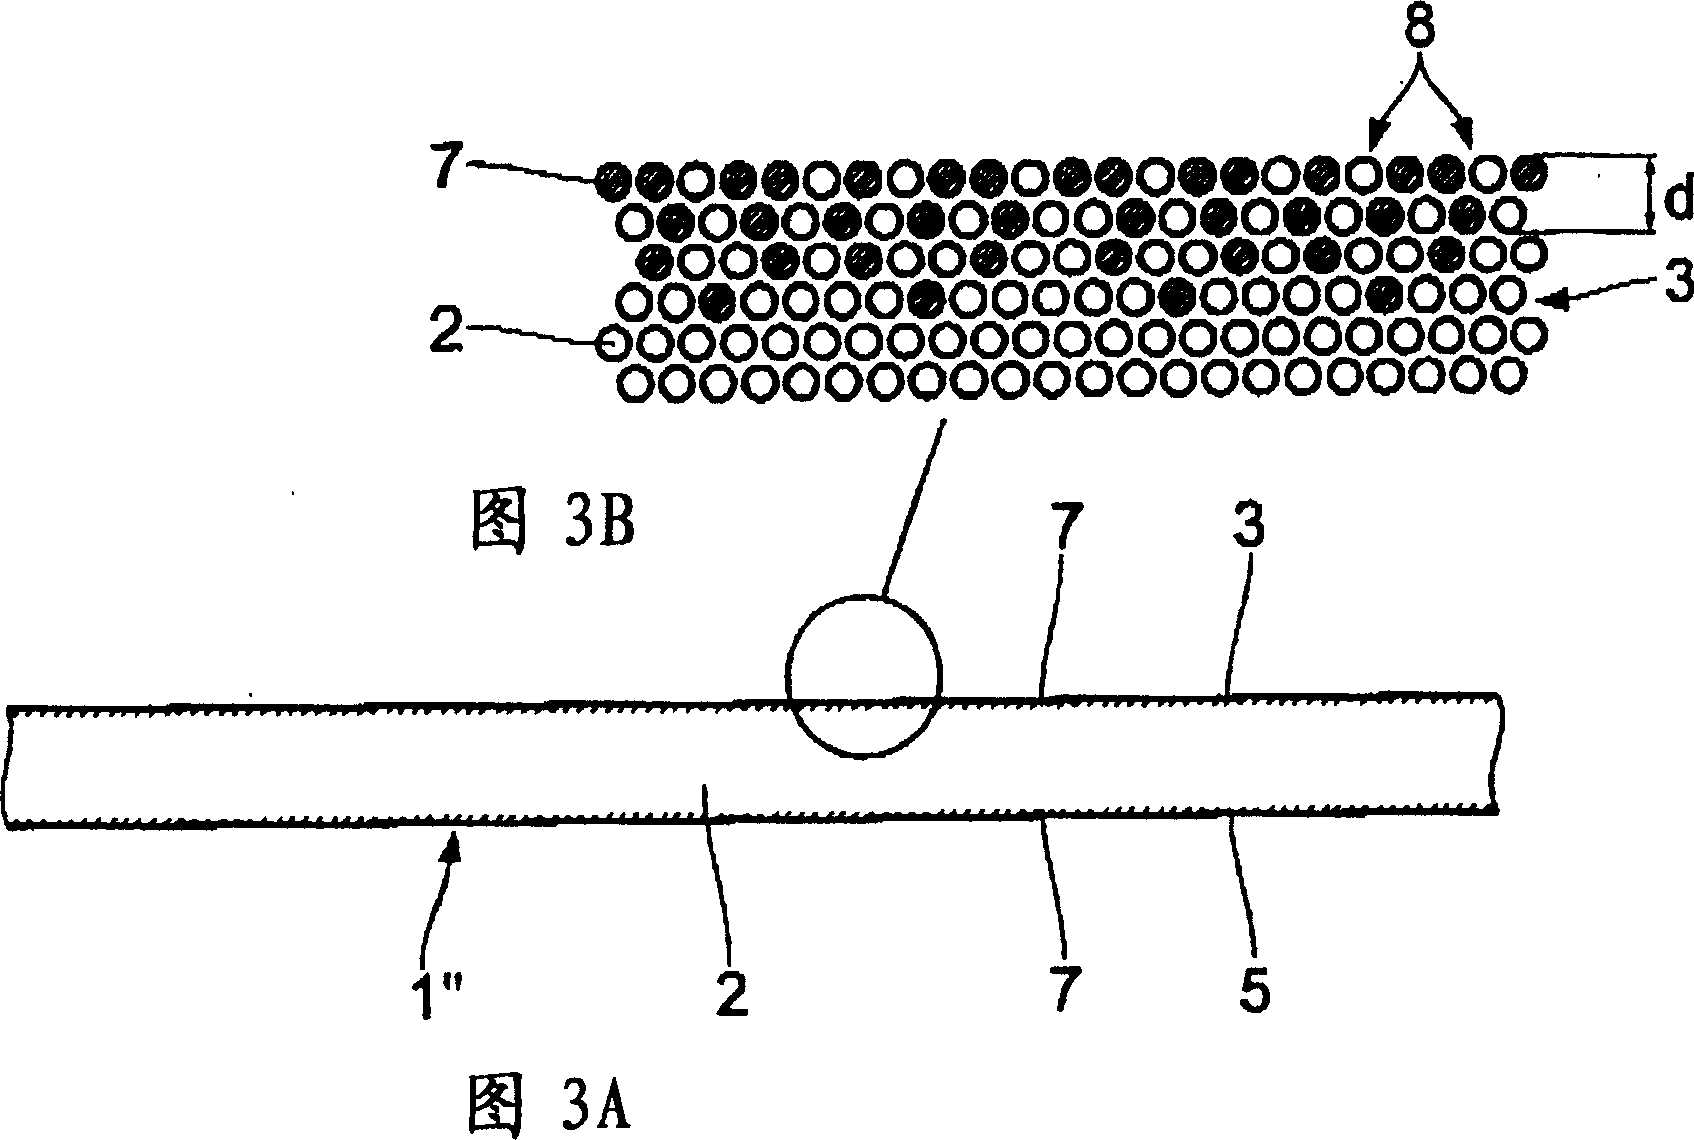 Absorbable medical element suitable for insertion into the body, in particular an absorbable implant